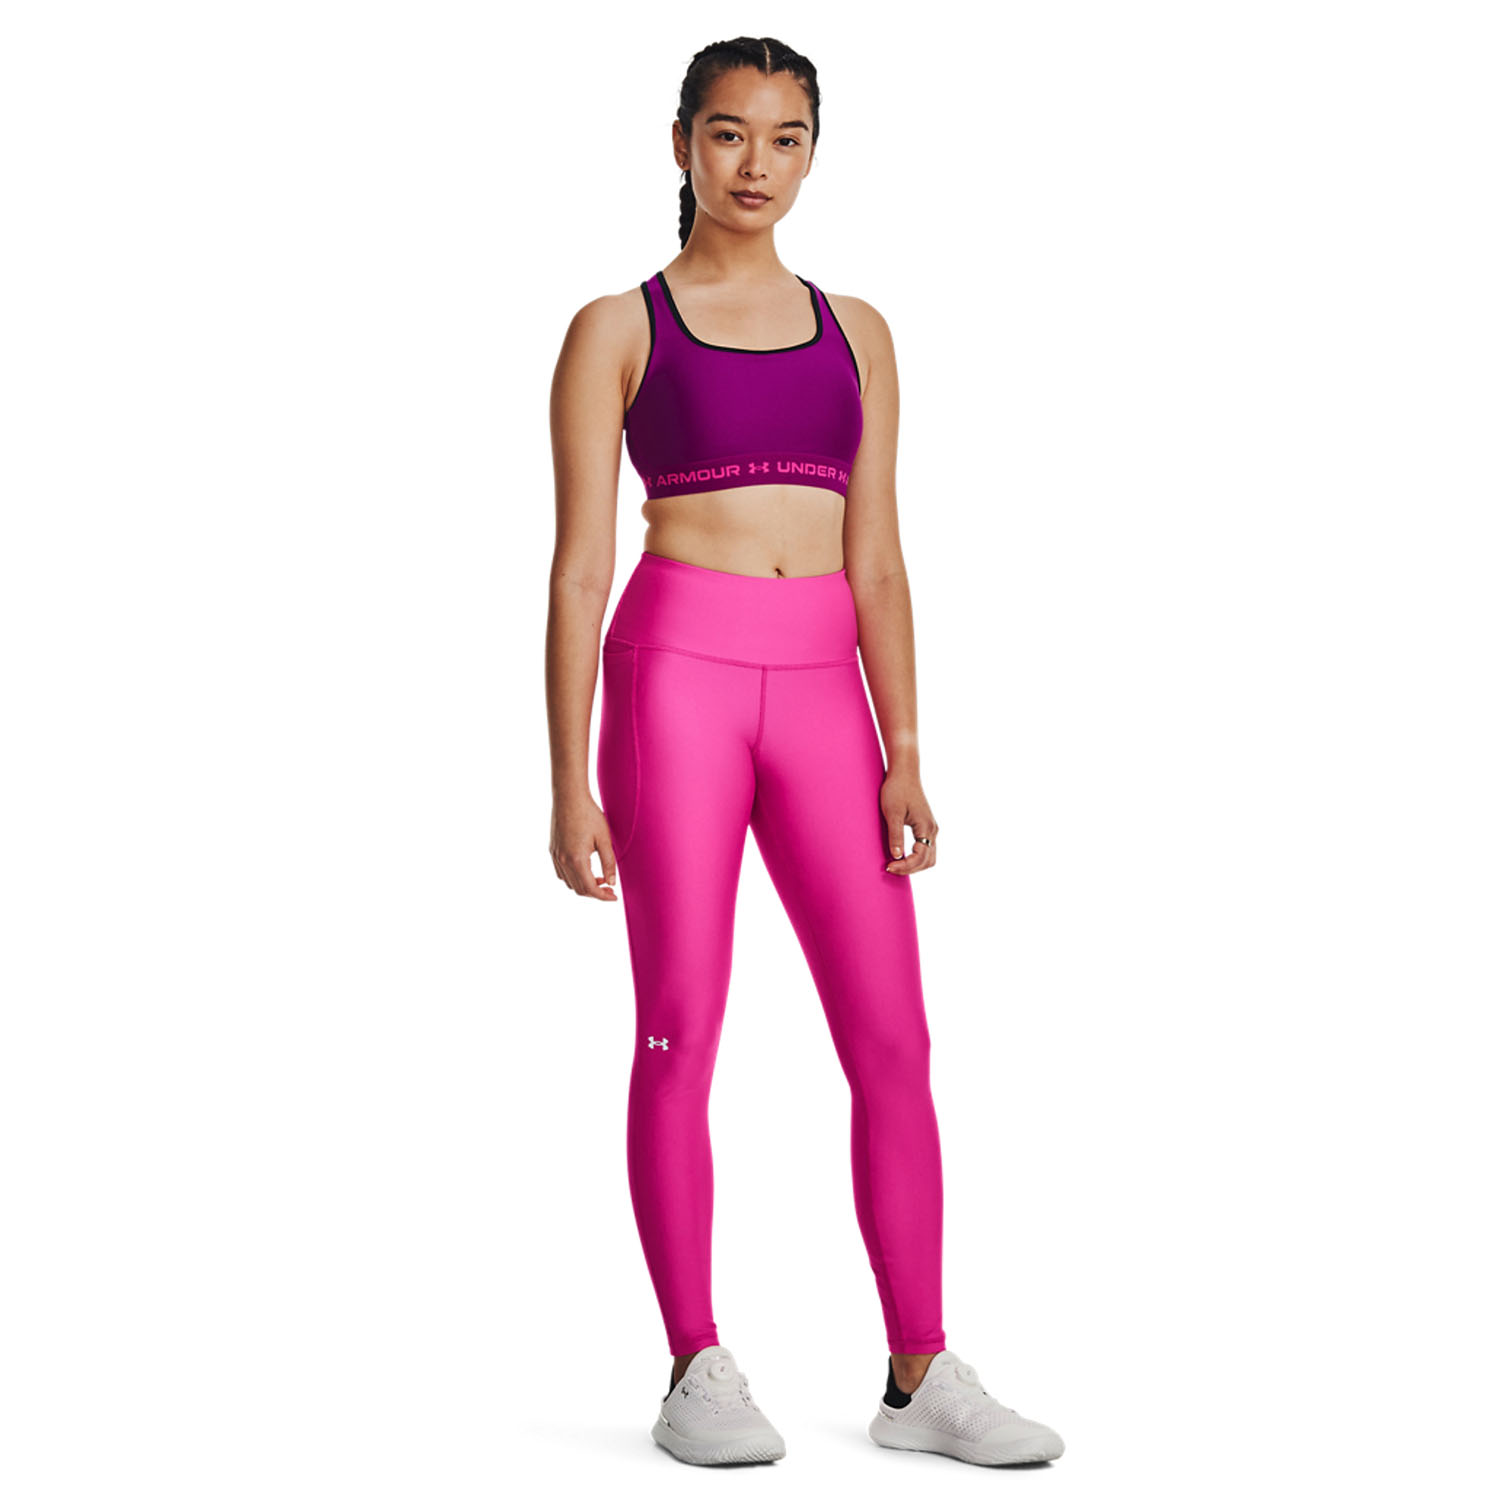 Under Armour Evolved Graphic Women's Tennis Tights - Rebel Pink